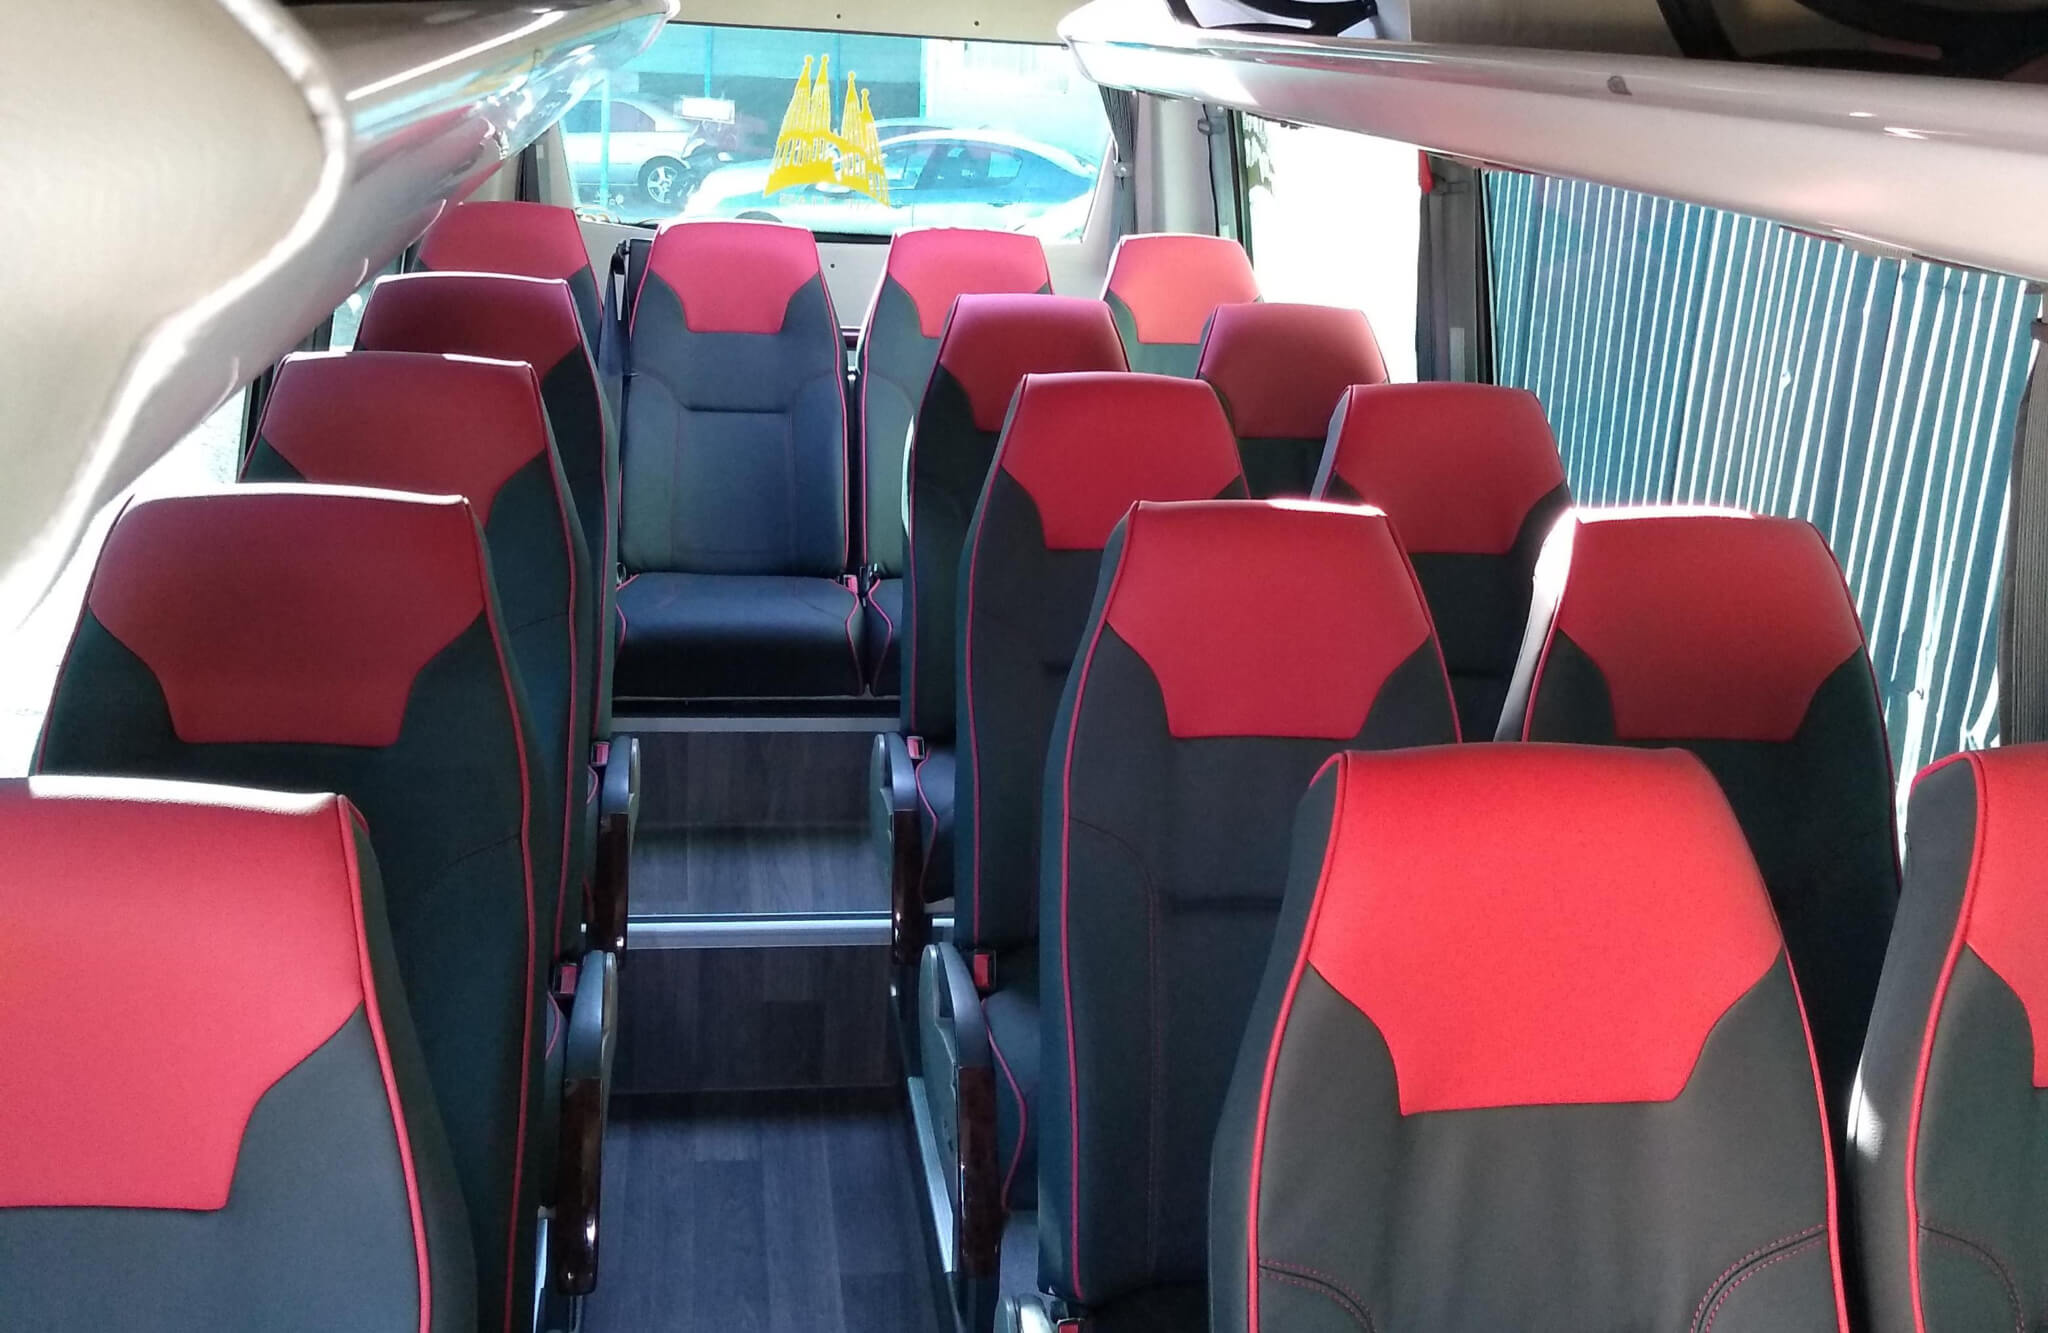 Rent a 16 seater Minibus  (Mercedes Sprinter 2011) from Bcn City Bus Tour s.l. from Viladecavalls 